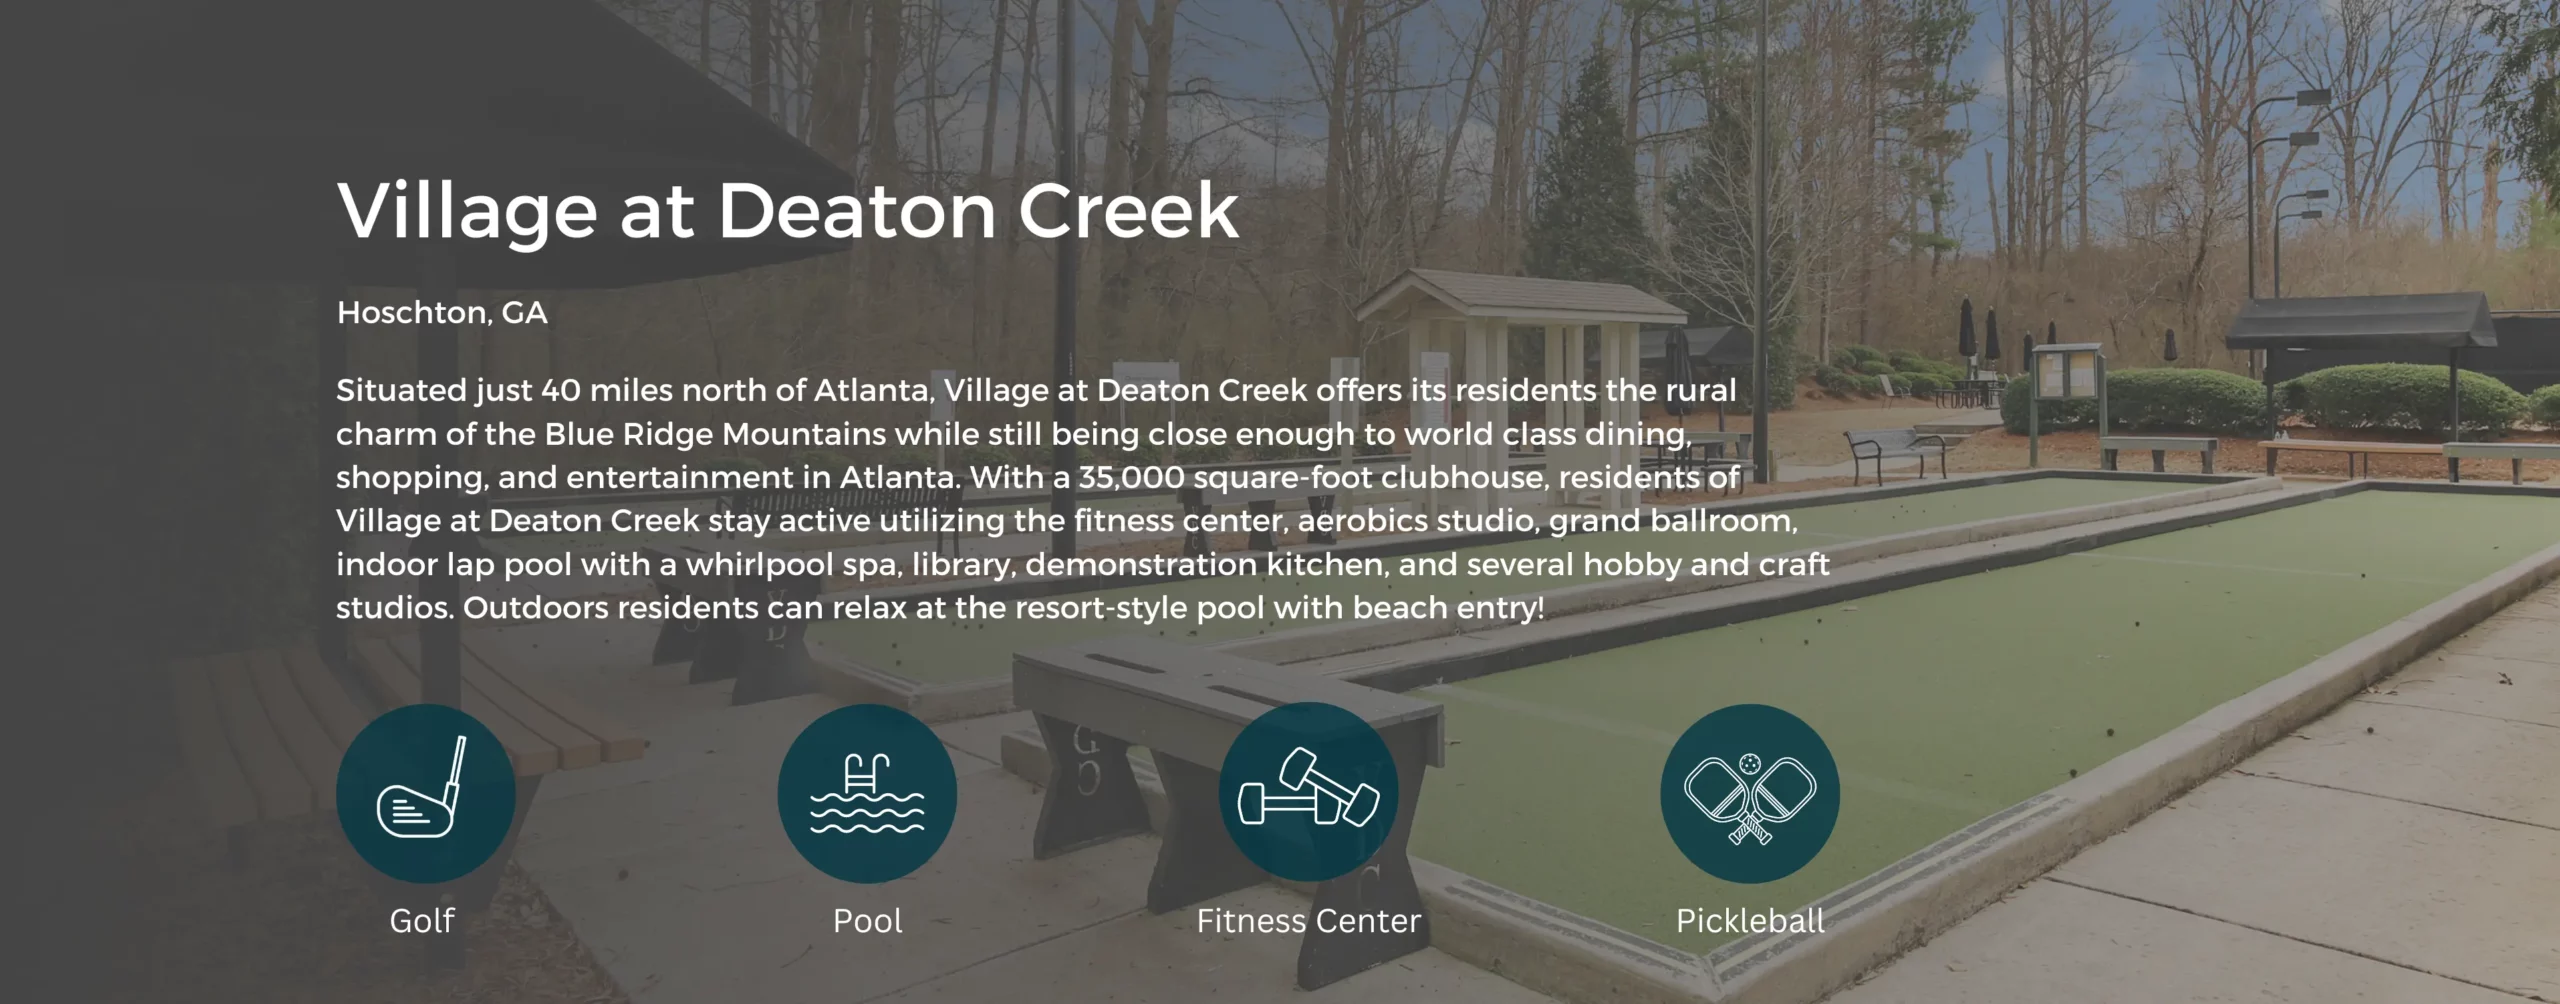 Icons that show Golf, Pool, Fitness Center, and Pickleball. Background image is a bocce ball court.